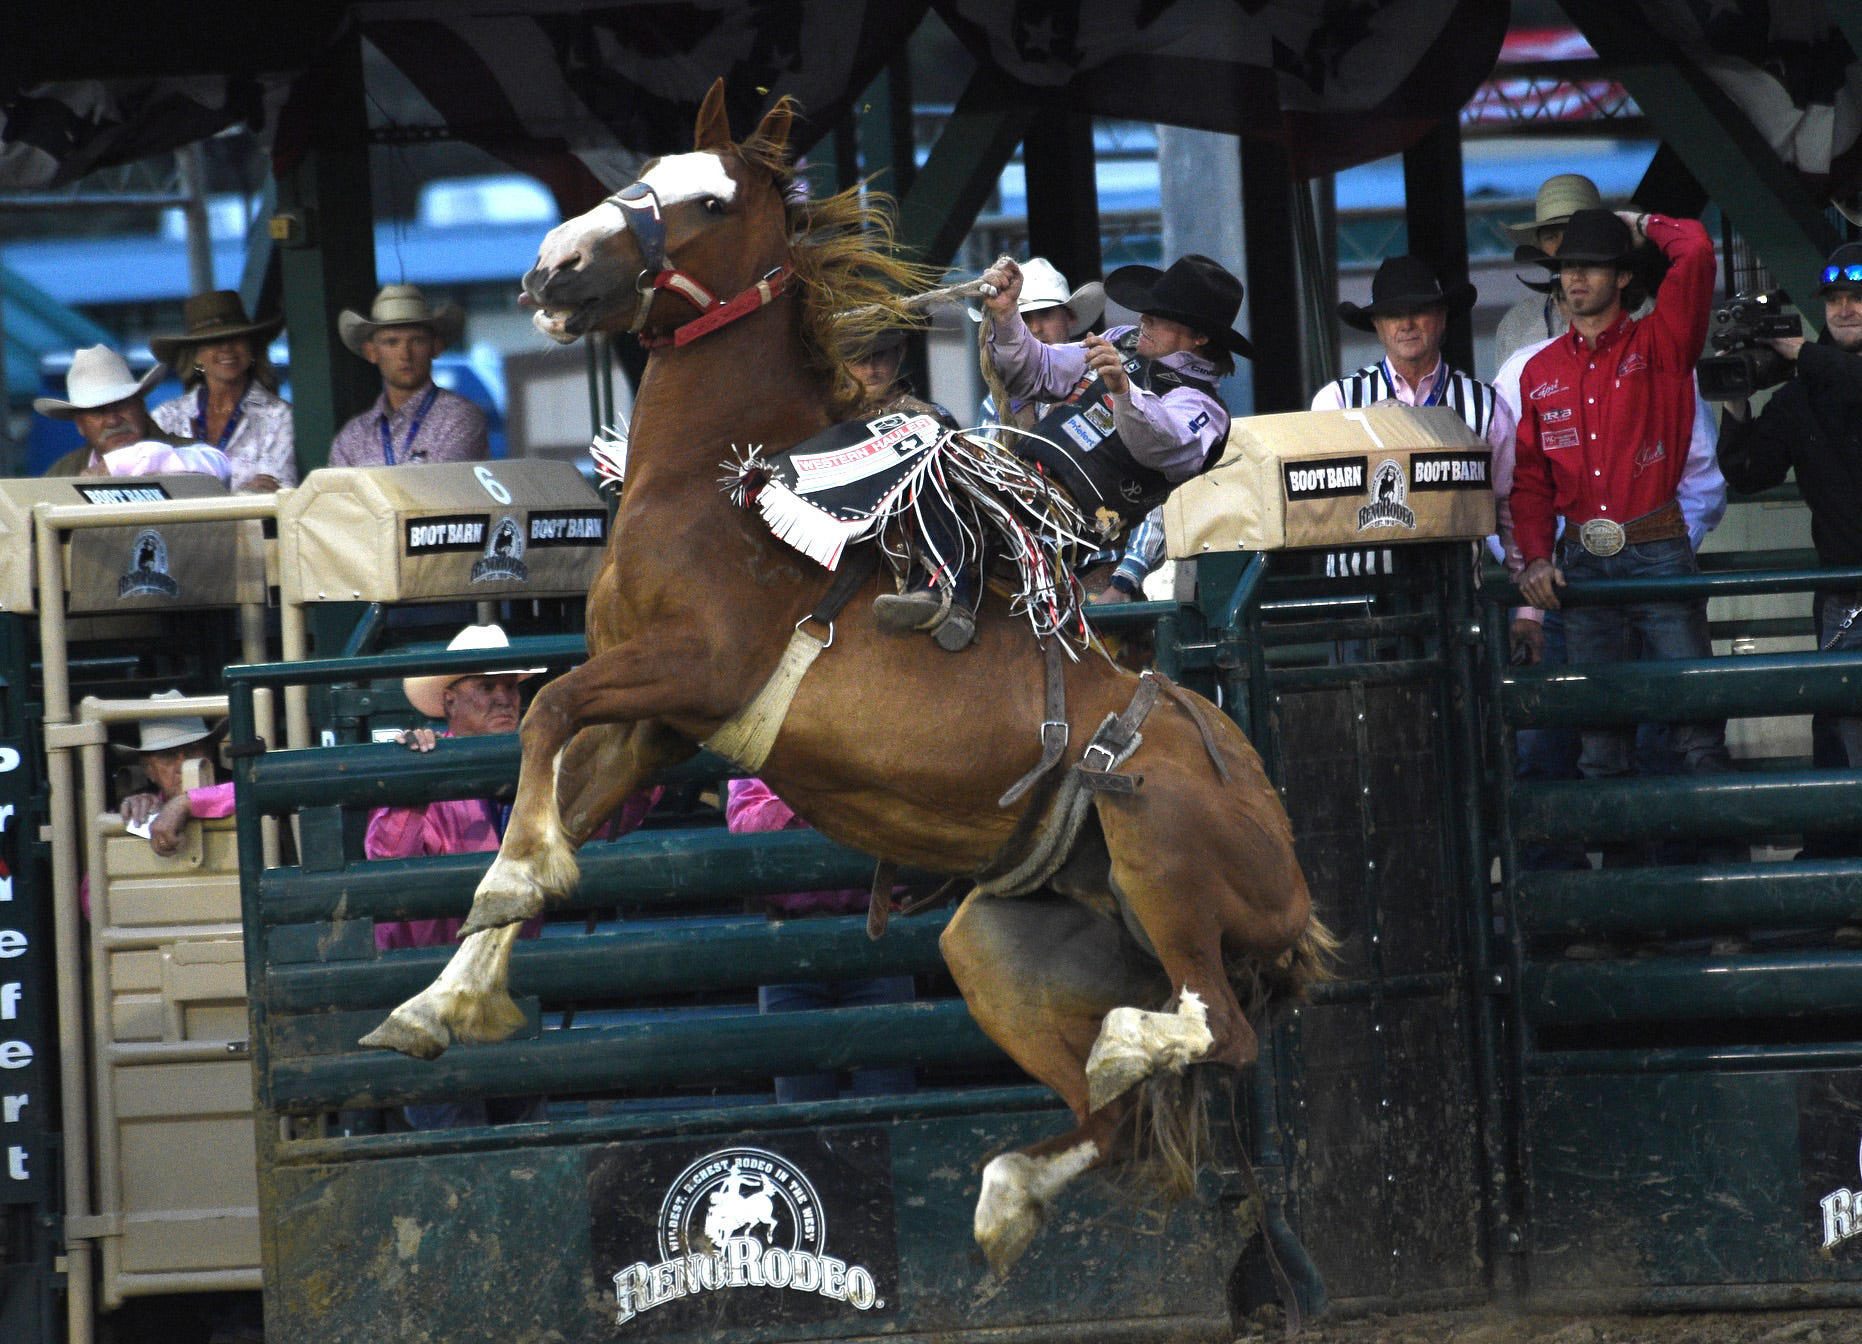 Reno Rodeo tickets are set to go on sale. Here's how to get passes to